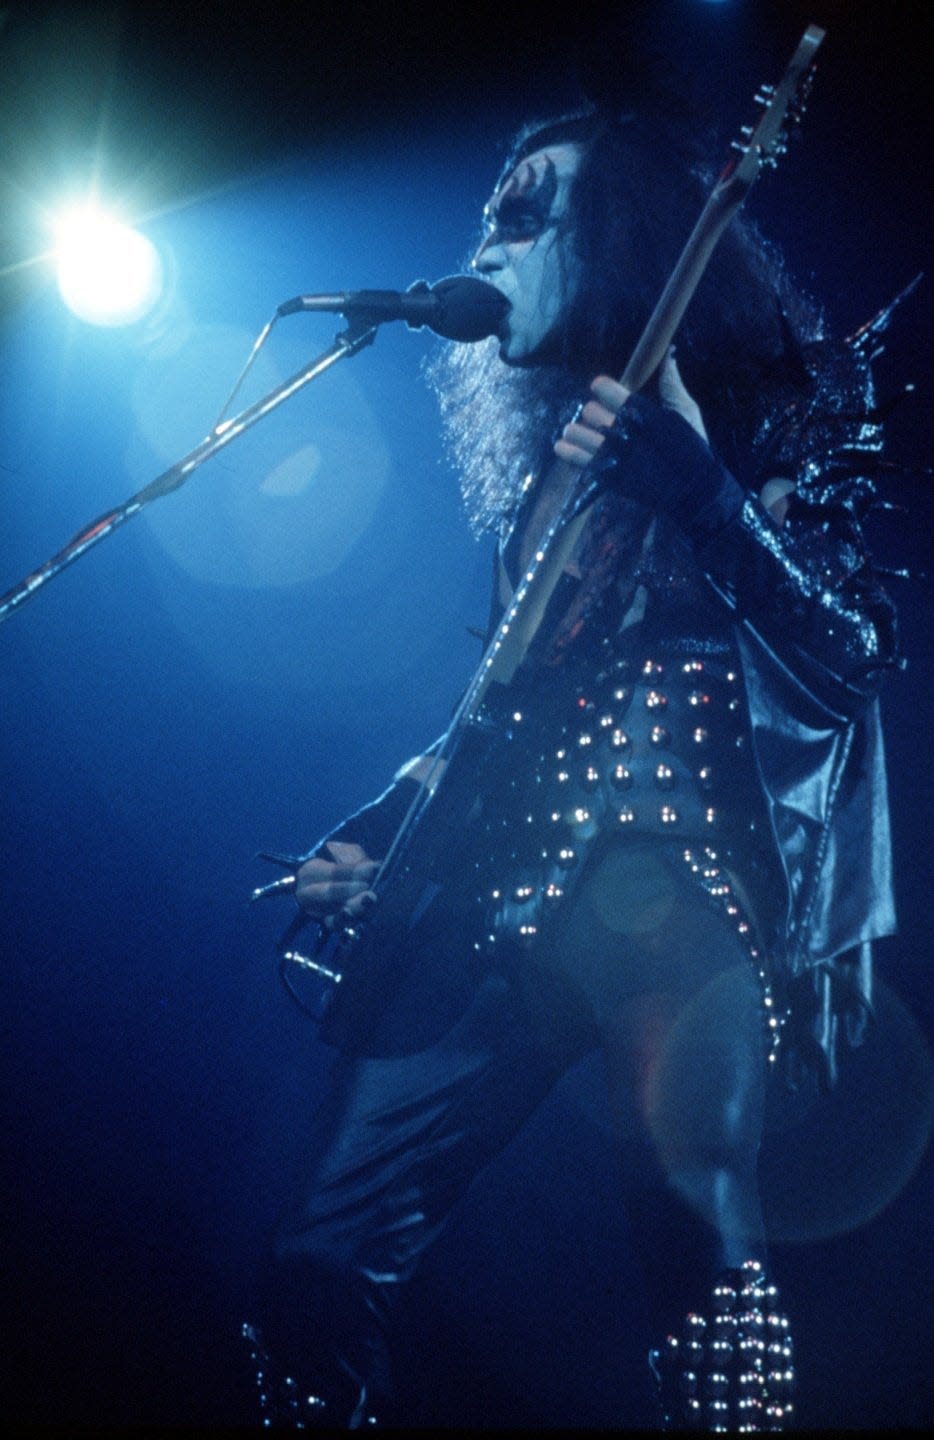 Gene Simmons performs onstage with Kiss at Cobo Arena on May 16, 1975.